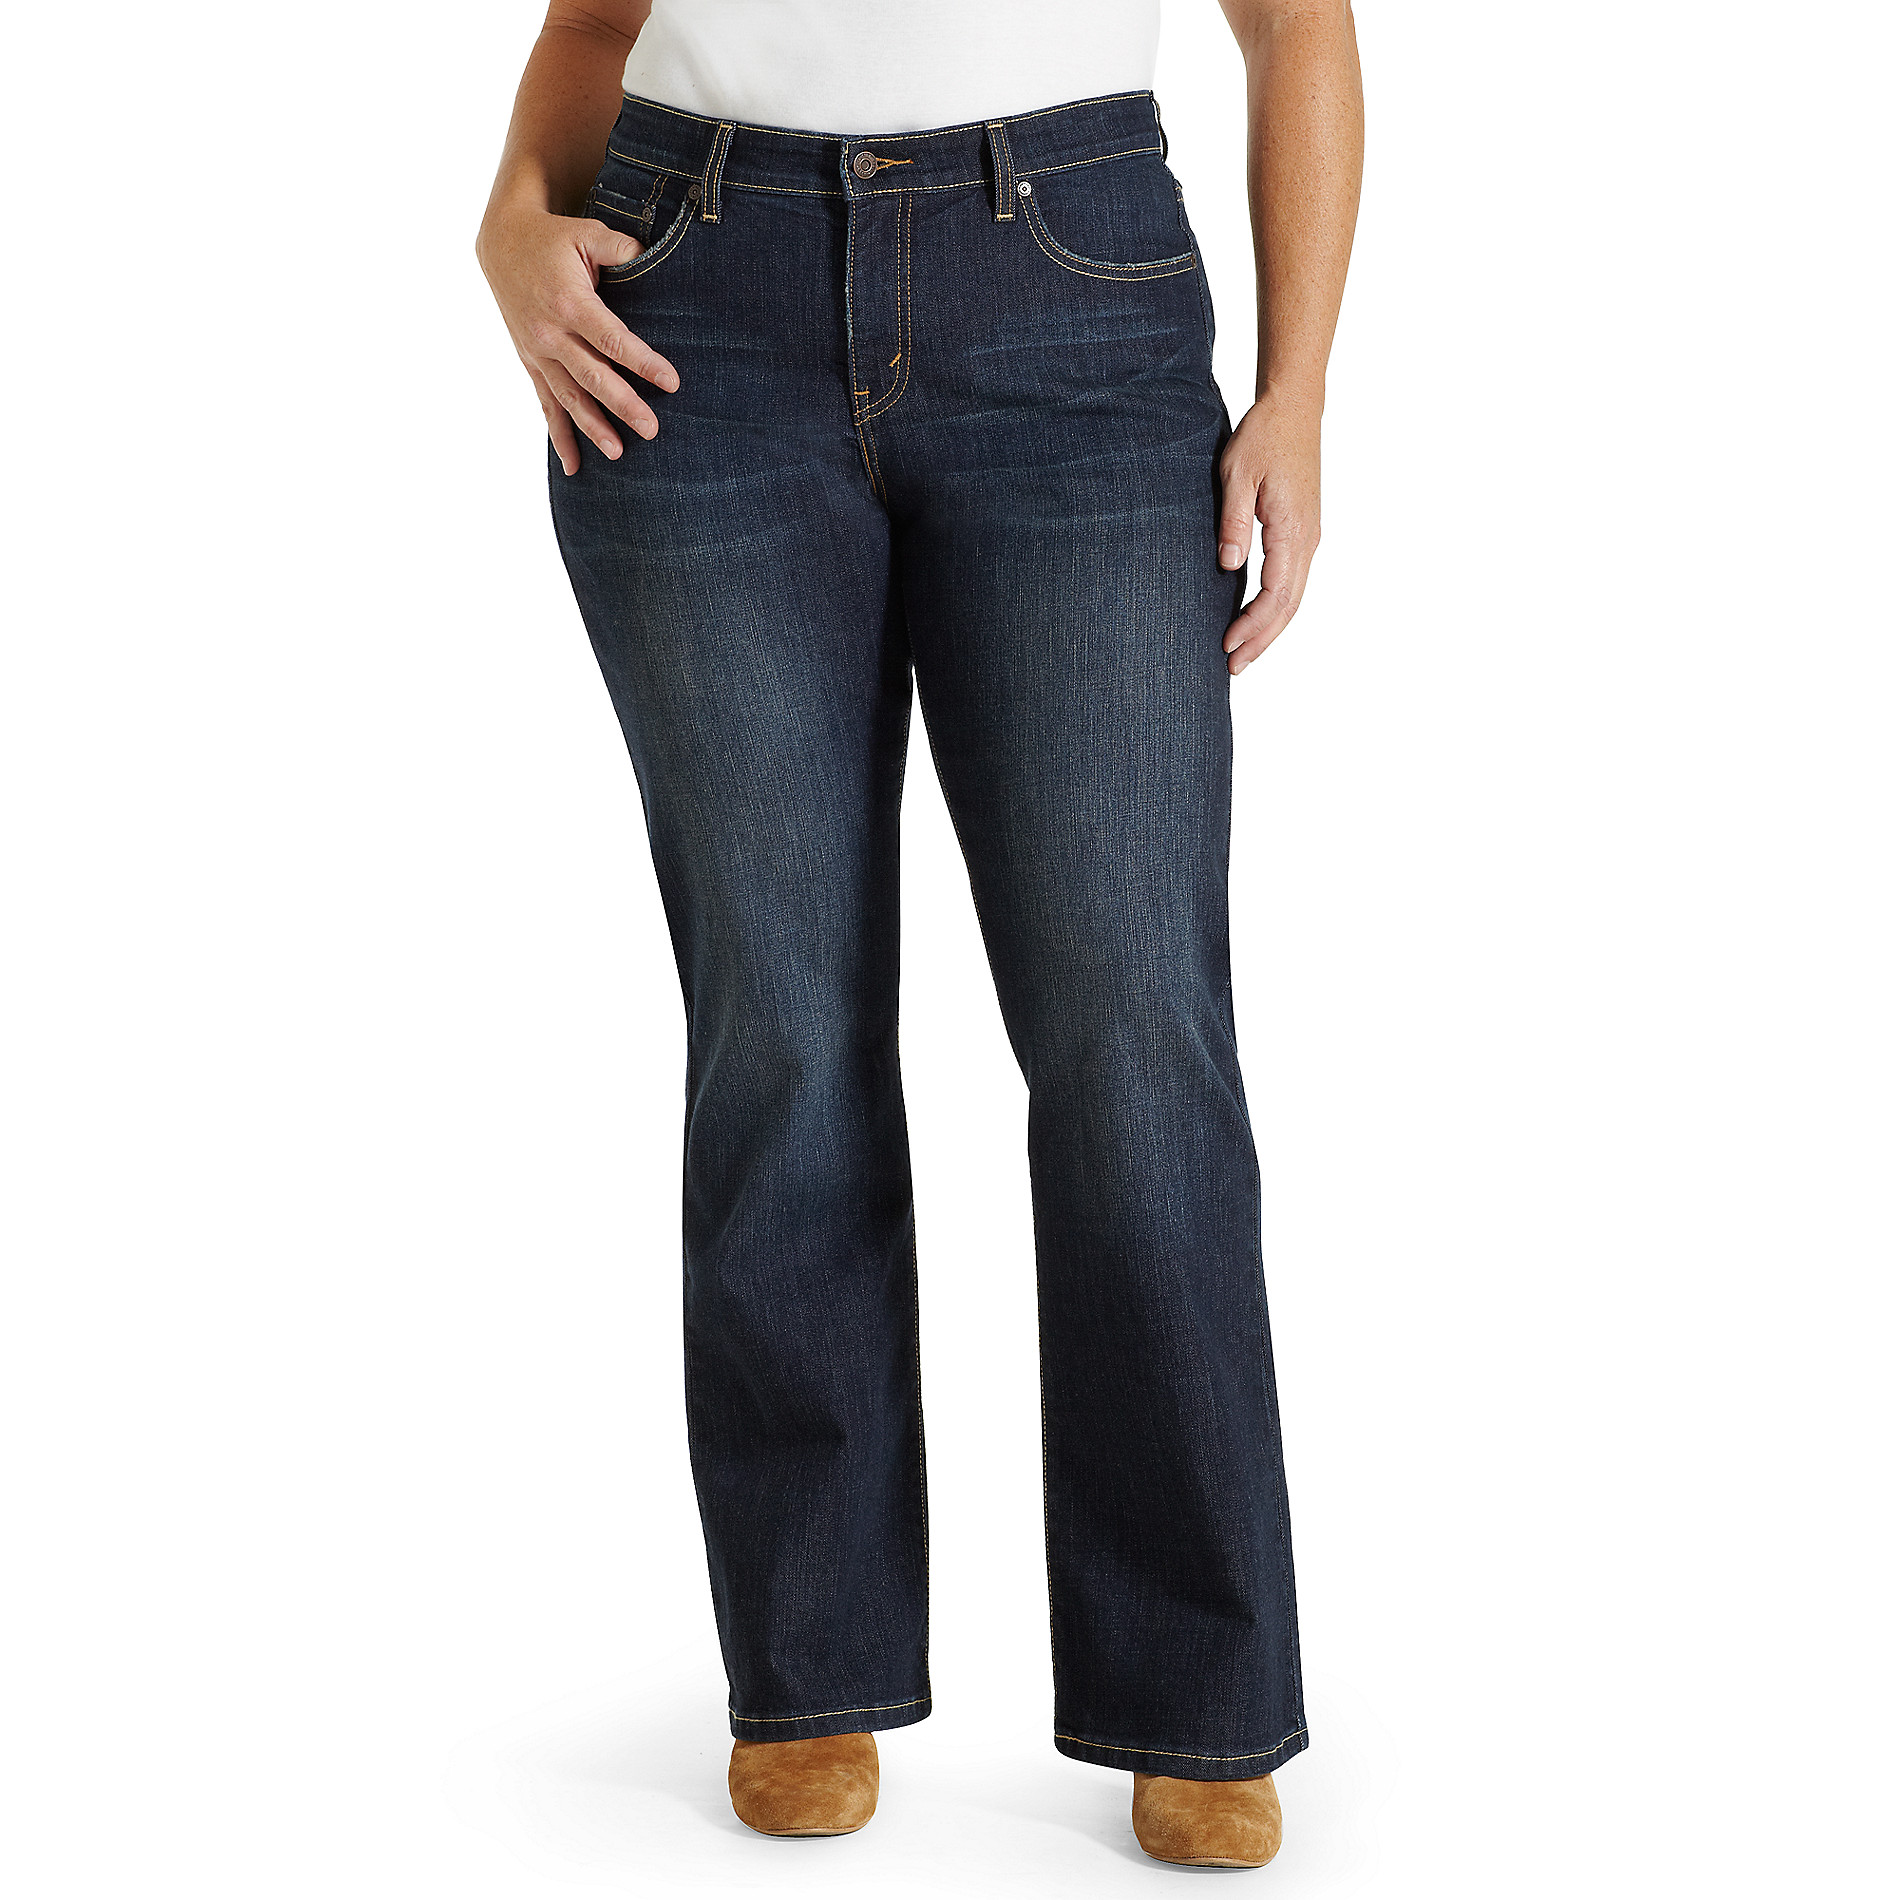 Levi's Women's Plus 512 Perfectly Slimming Boot Cut Jeans